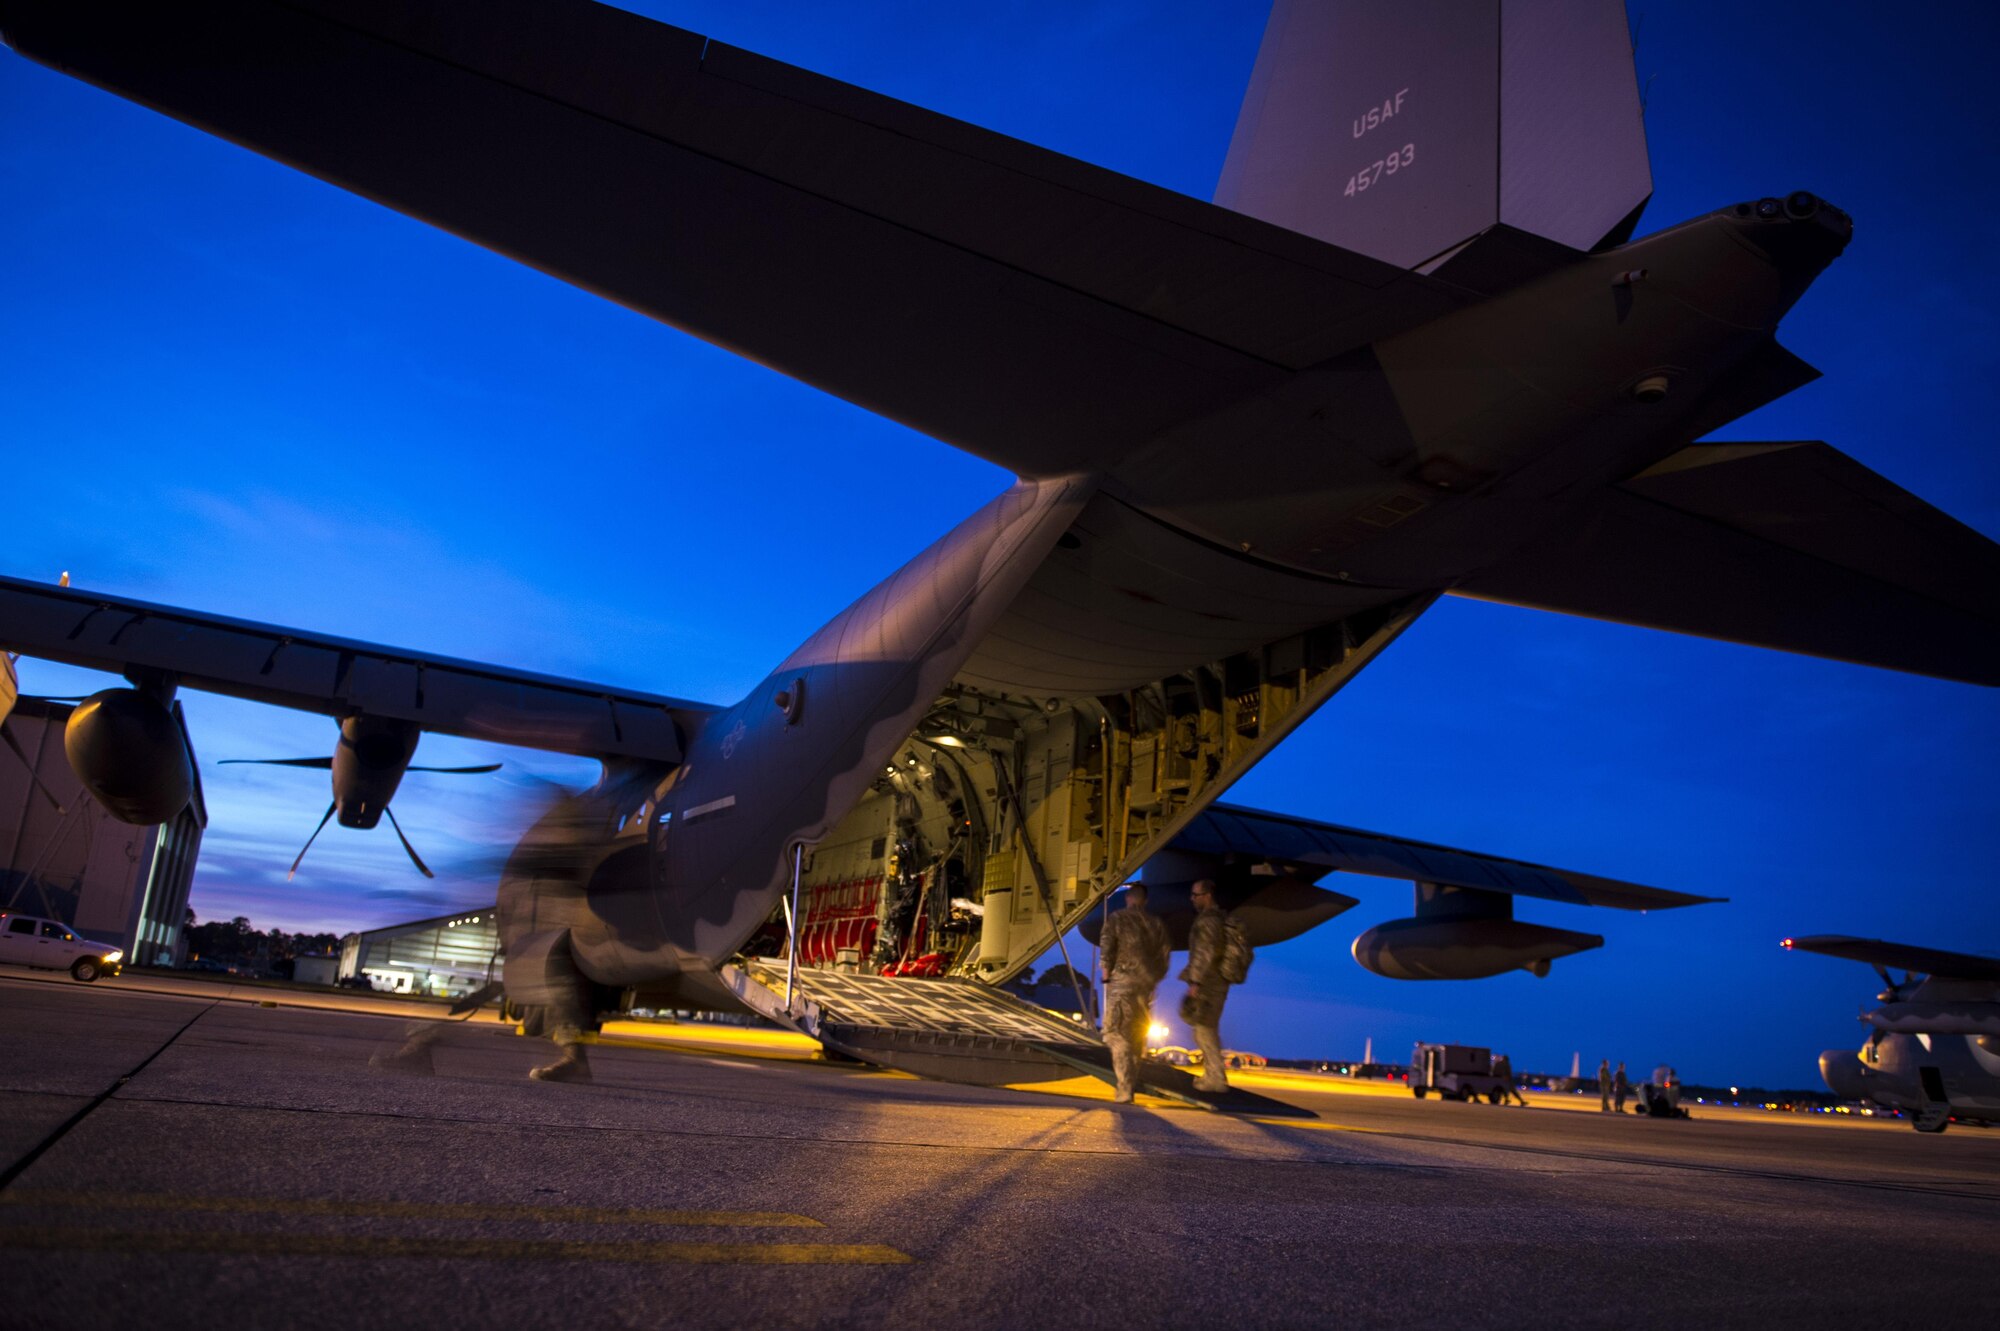 Surgical Team medics from the 720th Operations Support Squadron board an MC-130J Commando II during Emerald Warrior 17 at Hurlburt Field, Fla., March 2, 2017. Emerald Warrior is a U.S. Special Operations Command exercise during which joint special operations forces train to respond to various threats across the spectrum of conflict. (U.S. Air Force photo/Airman 1st Class Keifer Bowes)